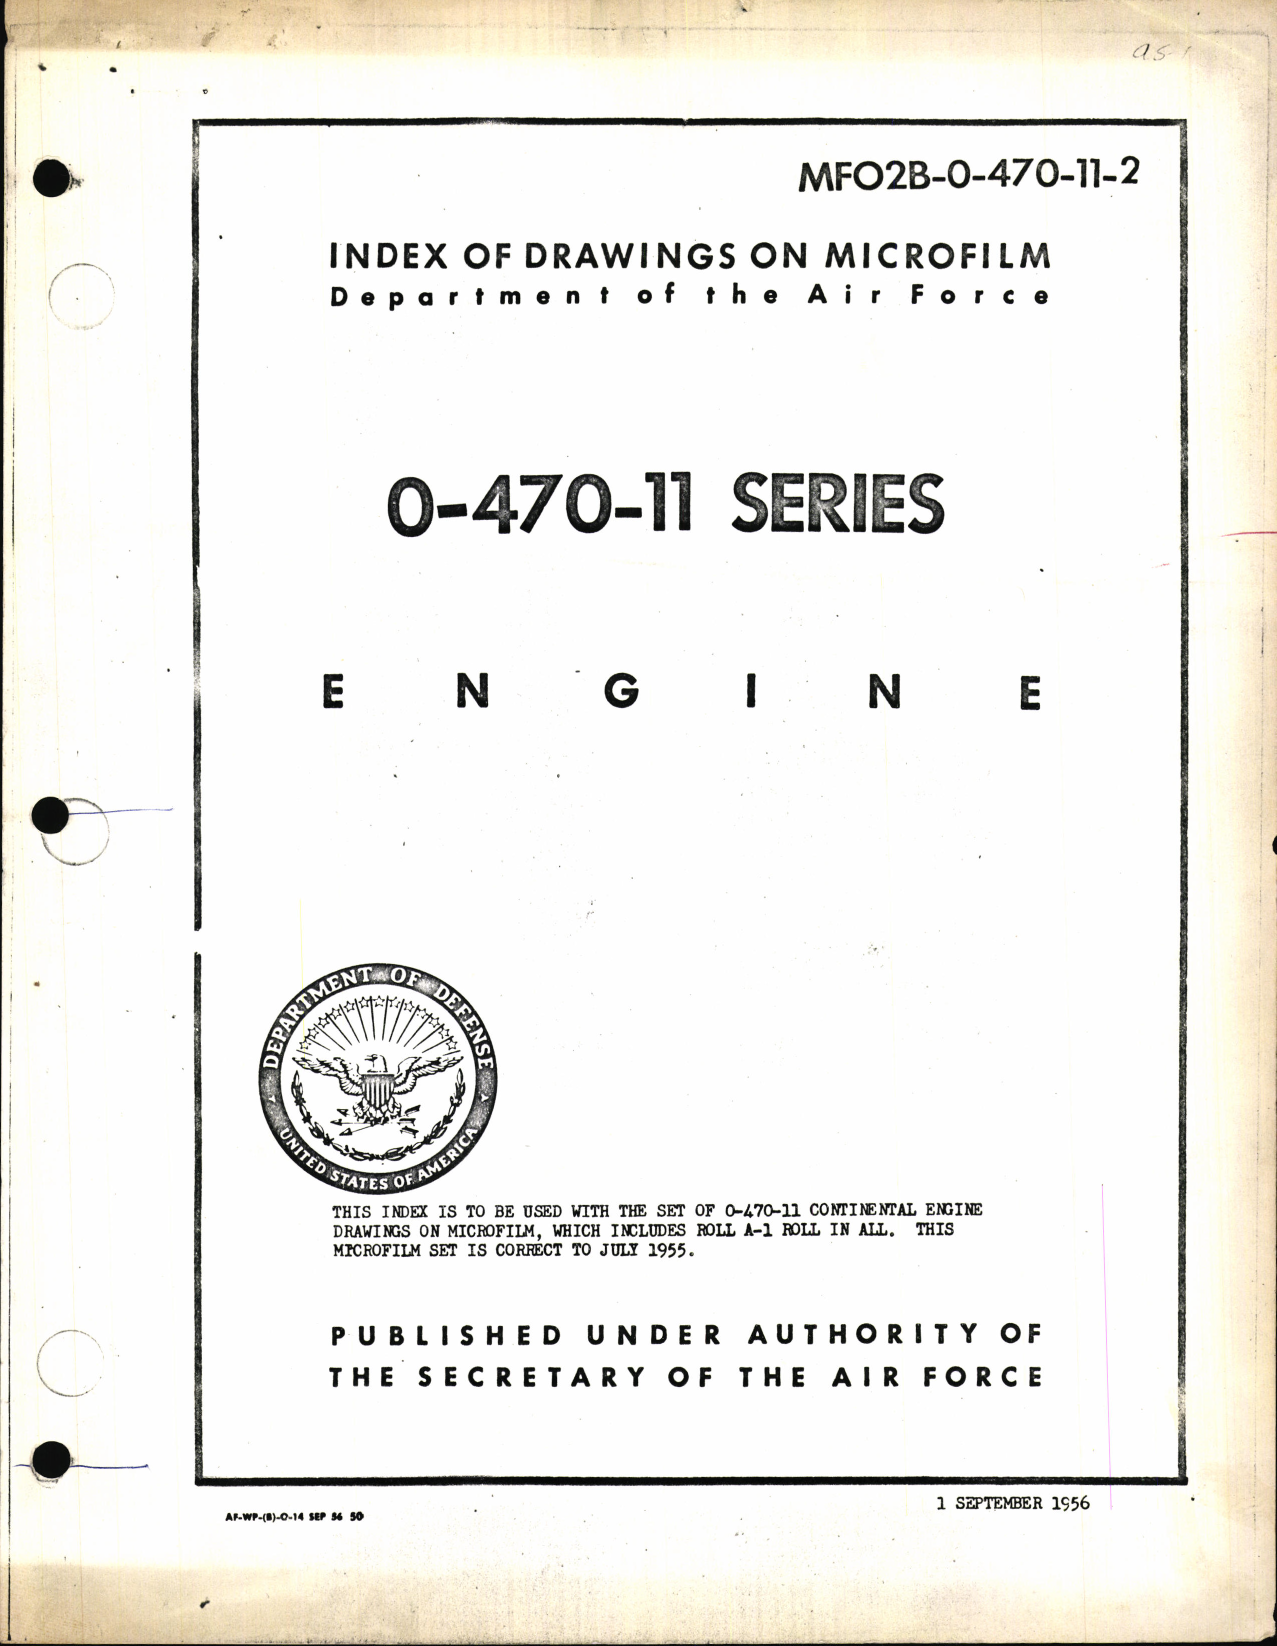 Sample page 1 from AirCorps Library document: Index of Drawings on Microfilm 0-470-11 Series Engines